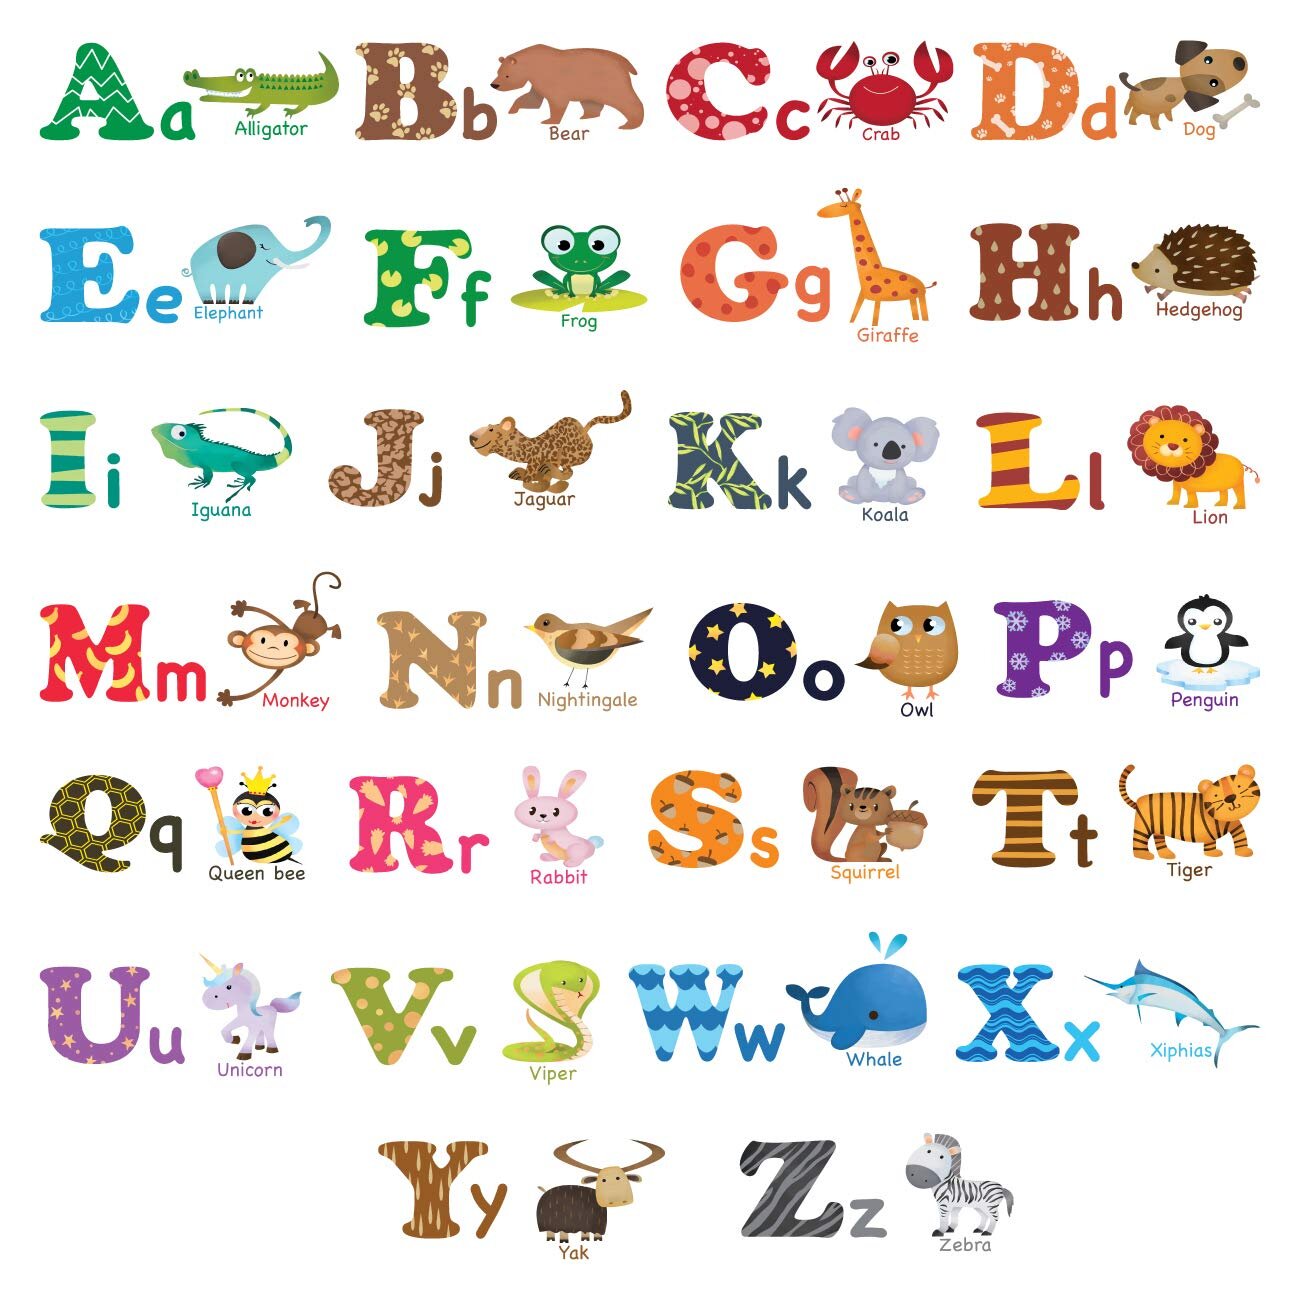 DEcOWALL DS-8001 Alphabet & Animals Kids Wall Stickers Wall Decals Peel and Stick Removable Wall Stickers for Kids Nursery Bedroom Living Room (Small)